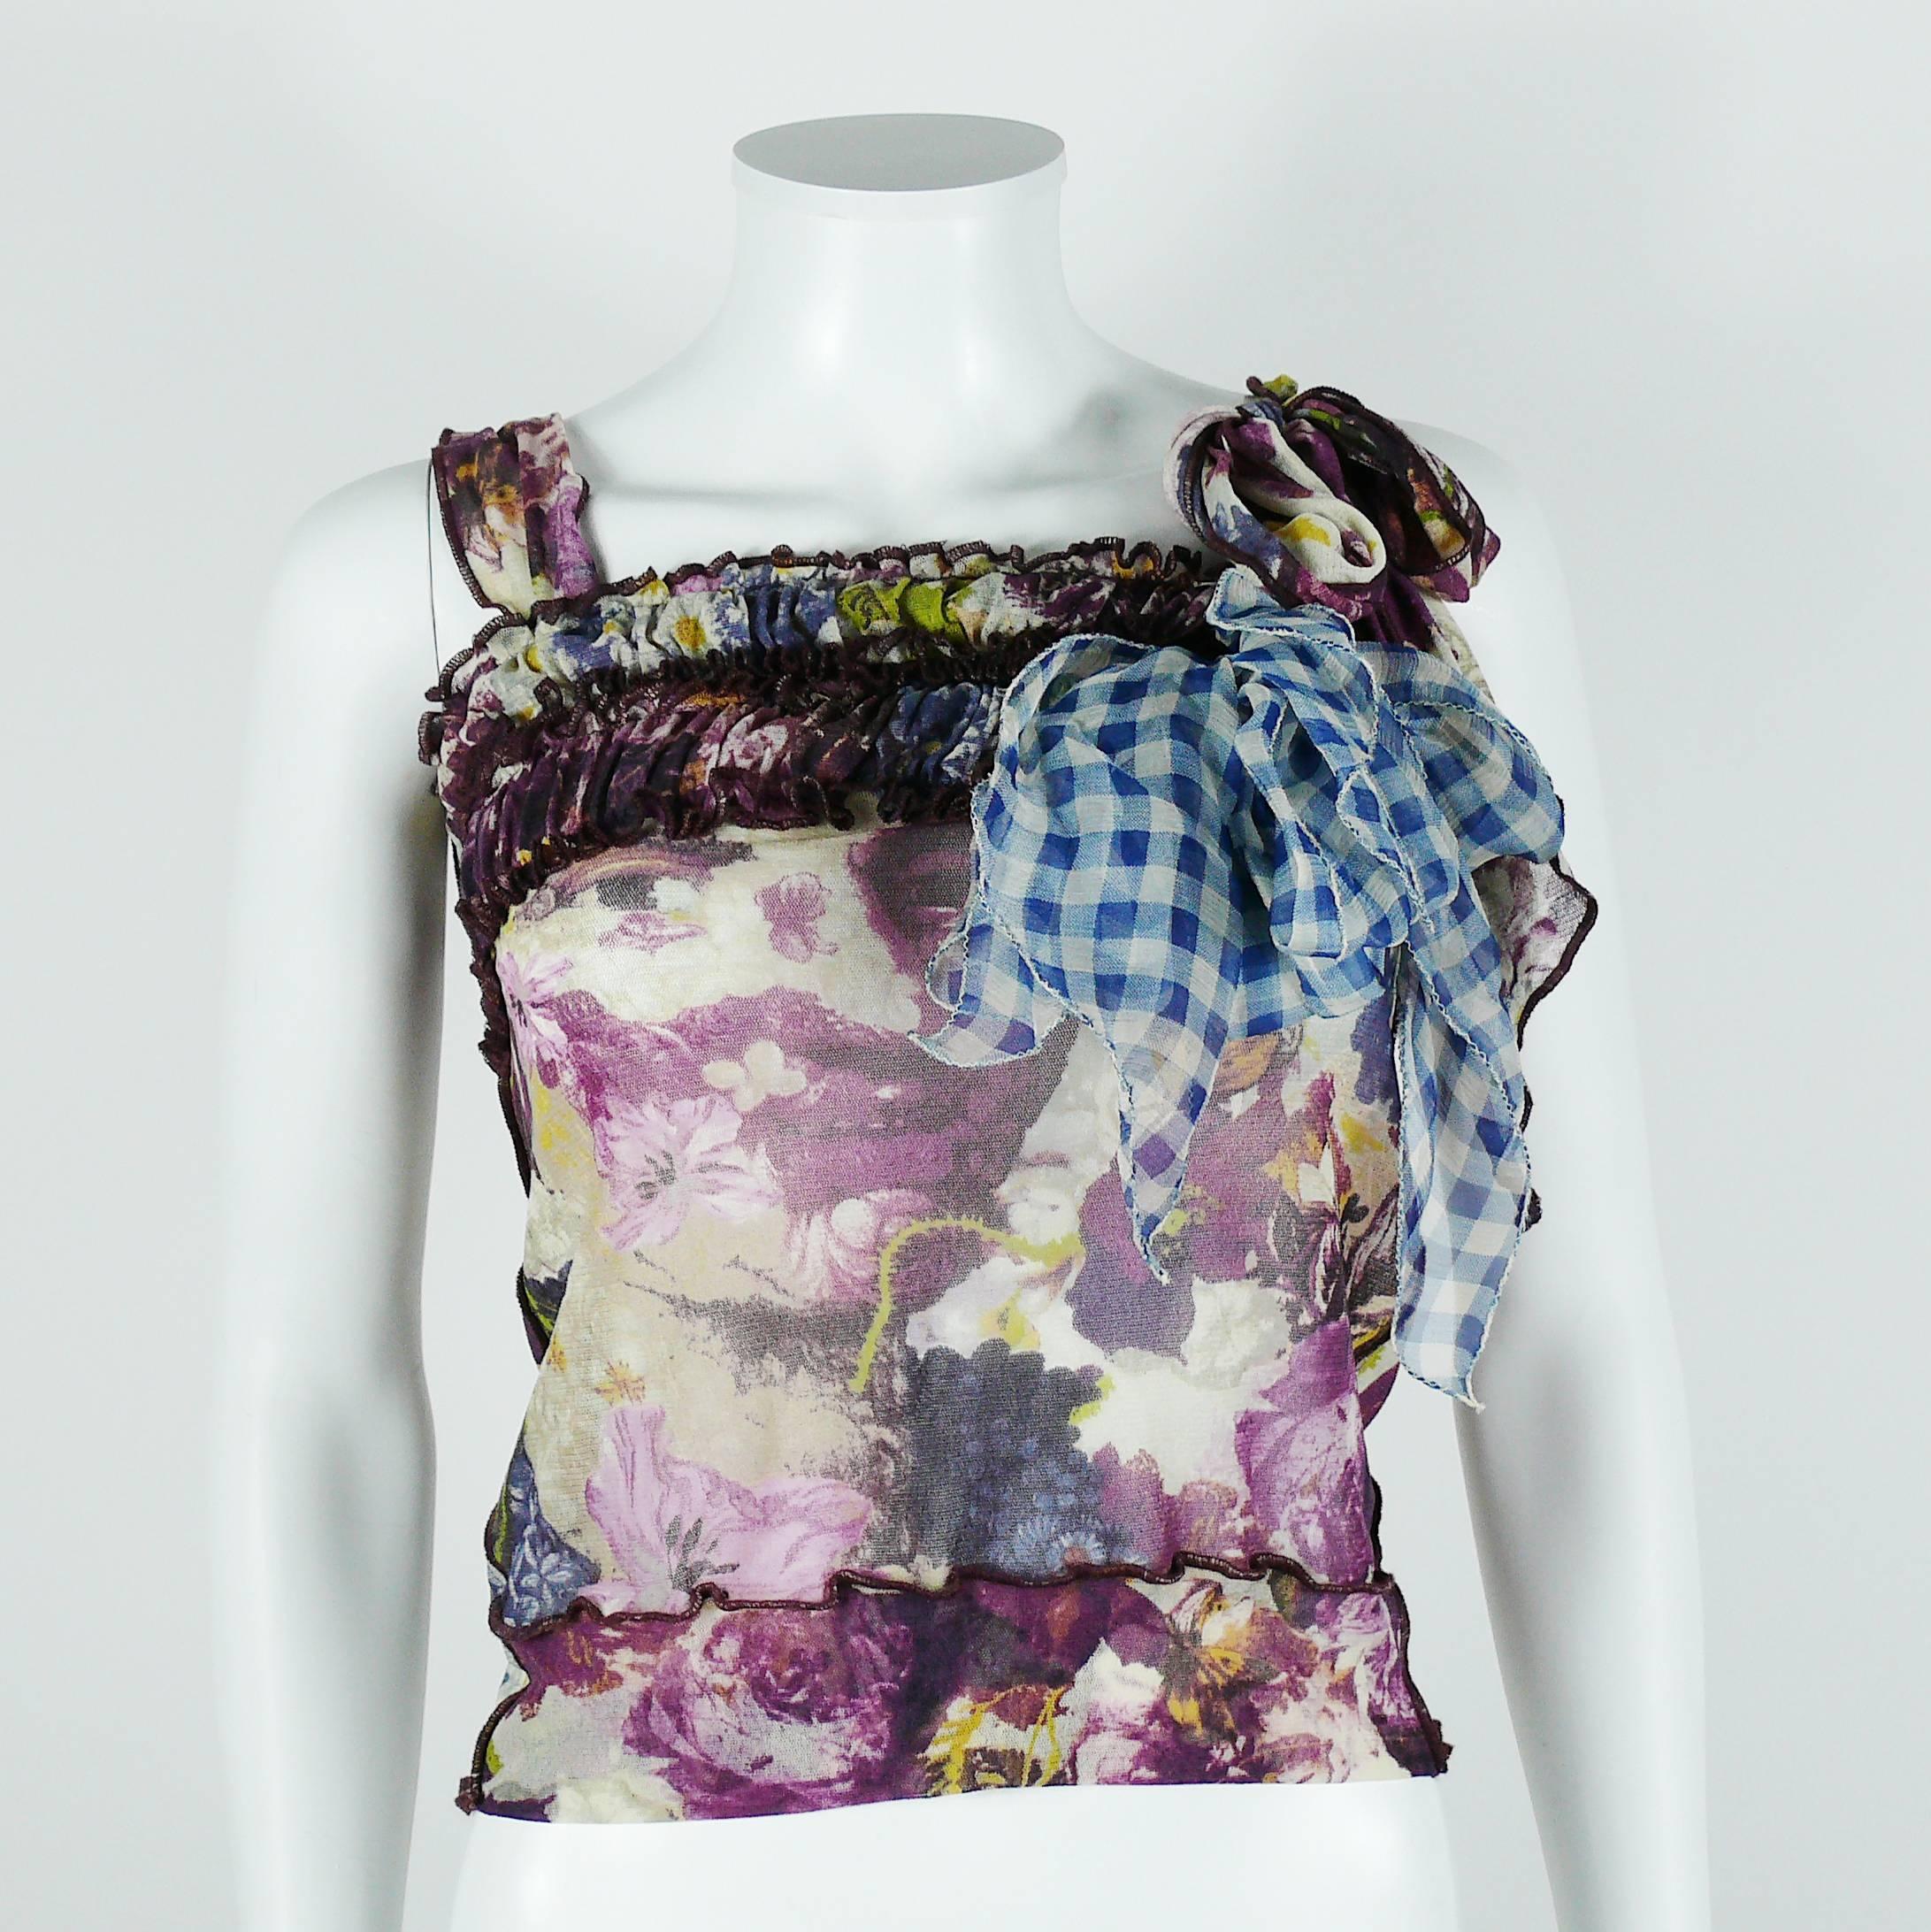 Jean Paul Gaultier Baroque Floral Print Mesh Top and Skirt Ensemble Size S 4